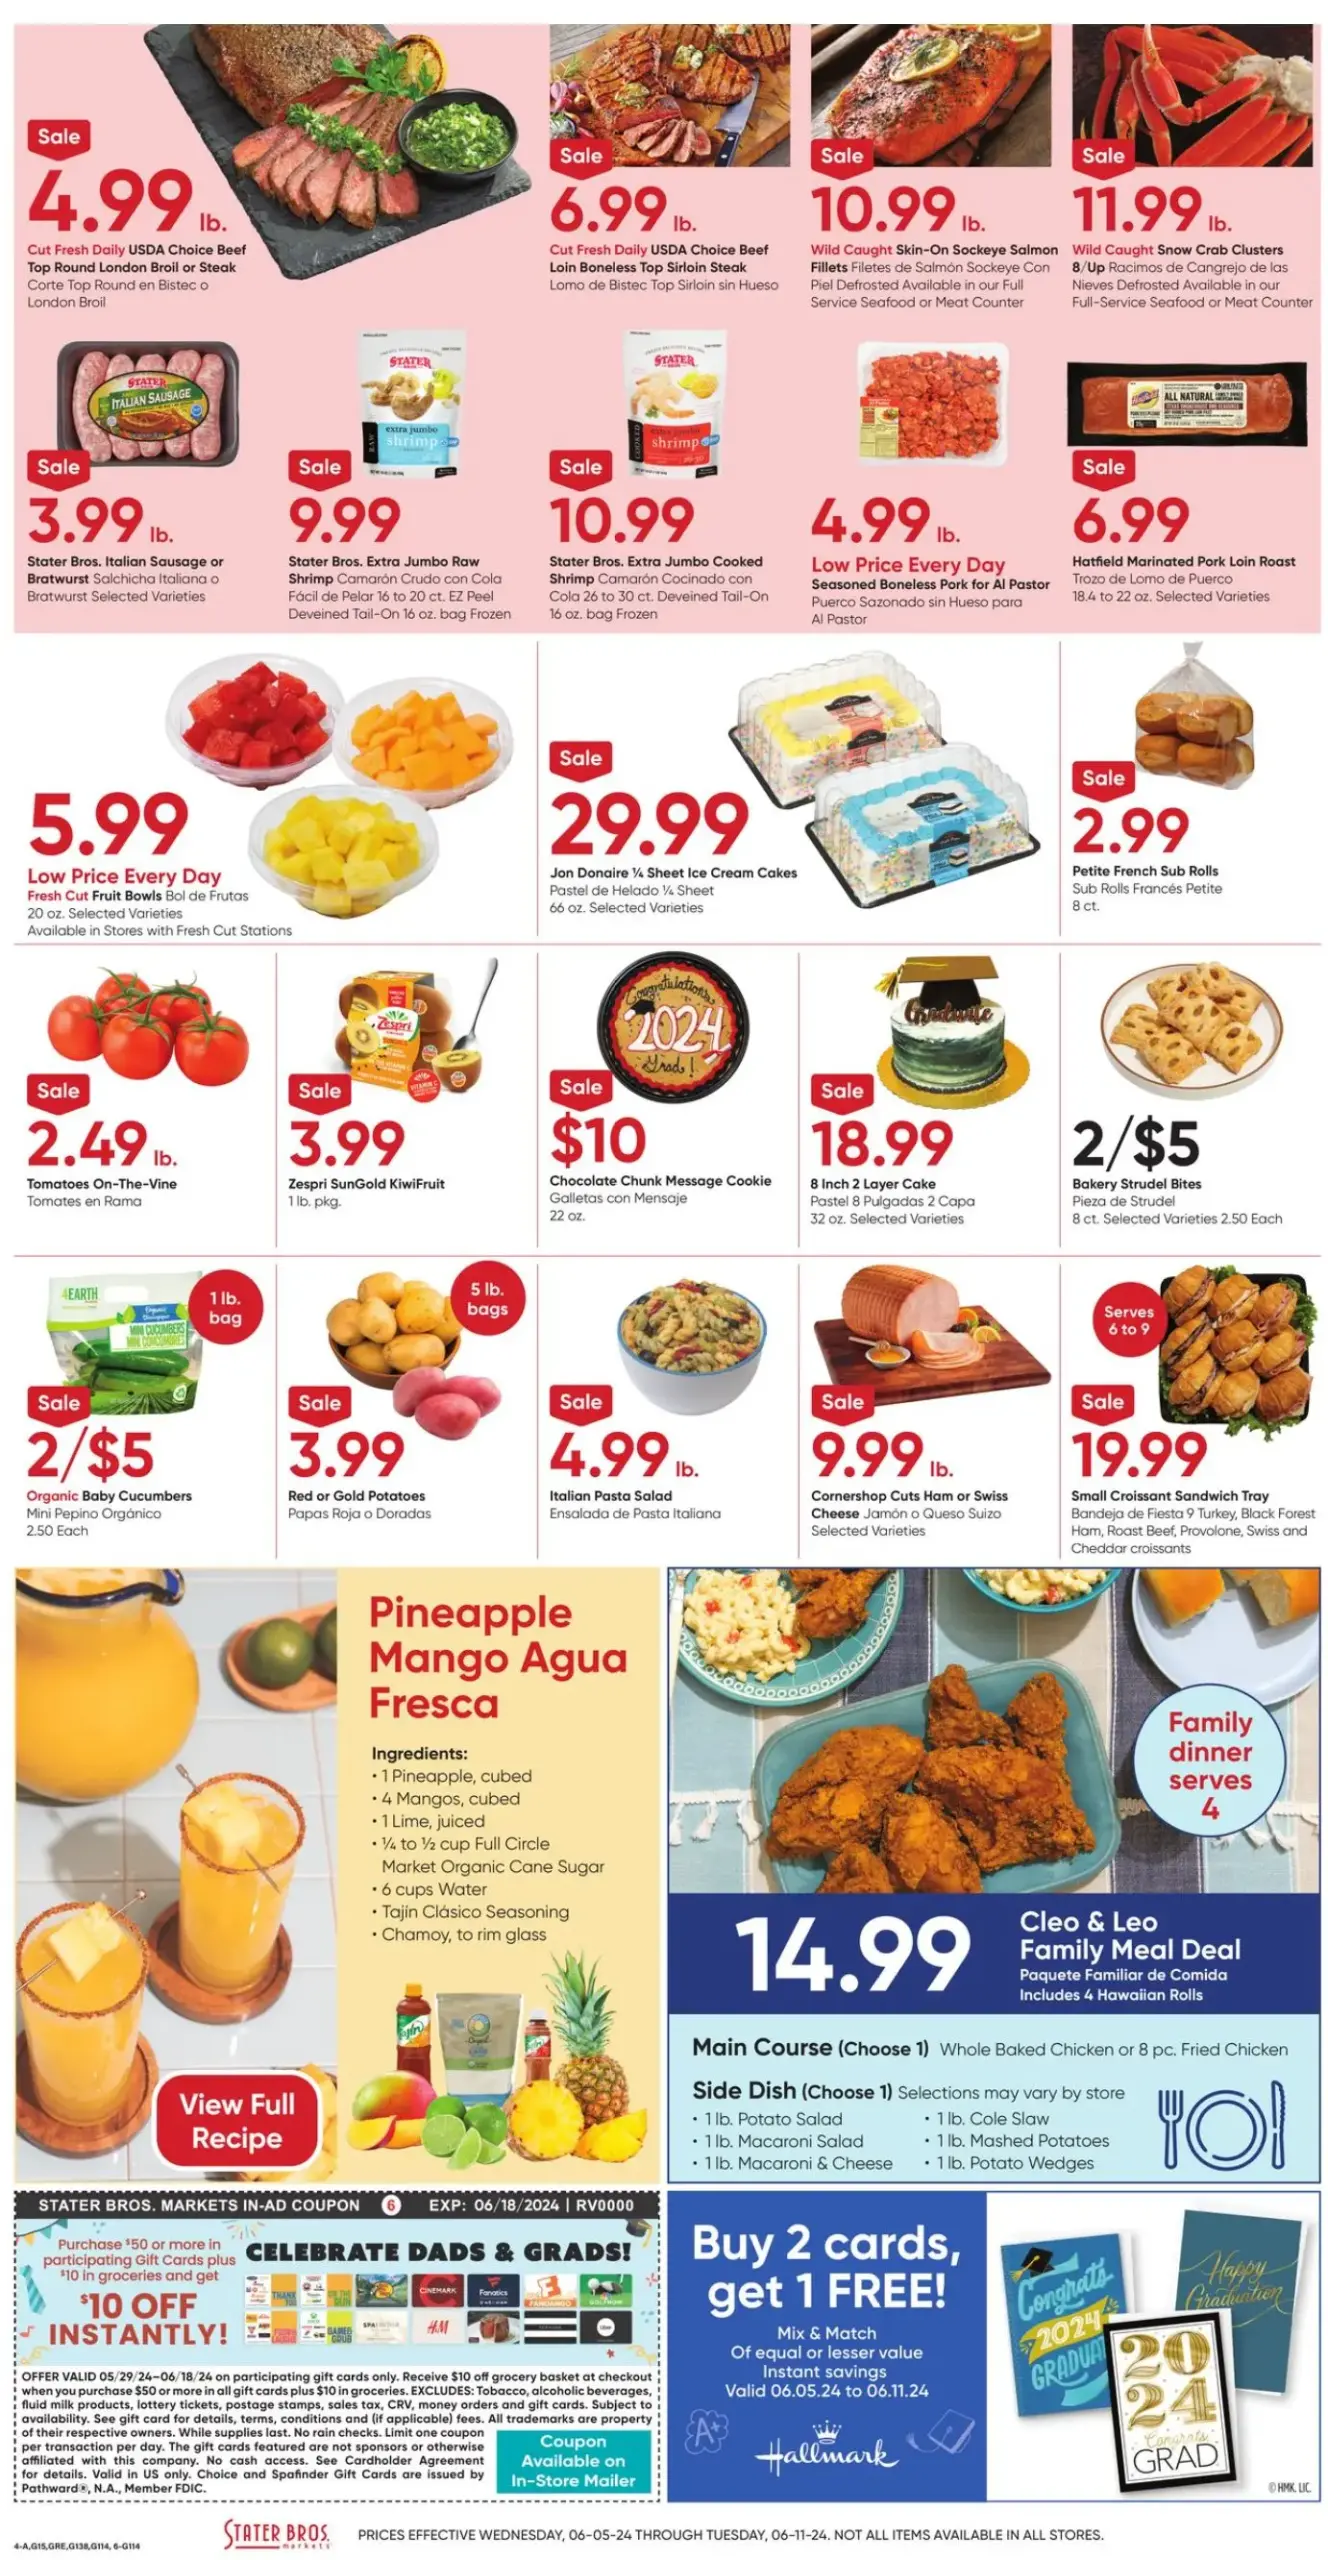 Stater Bros July 2024 Weekly Sales, Deals, Discounts and Digital Coupons.